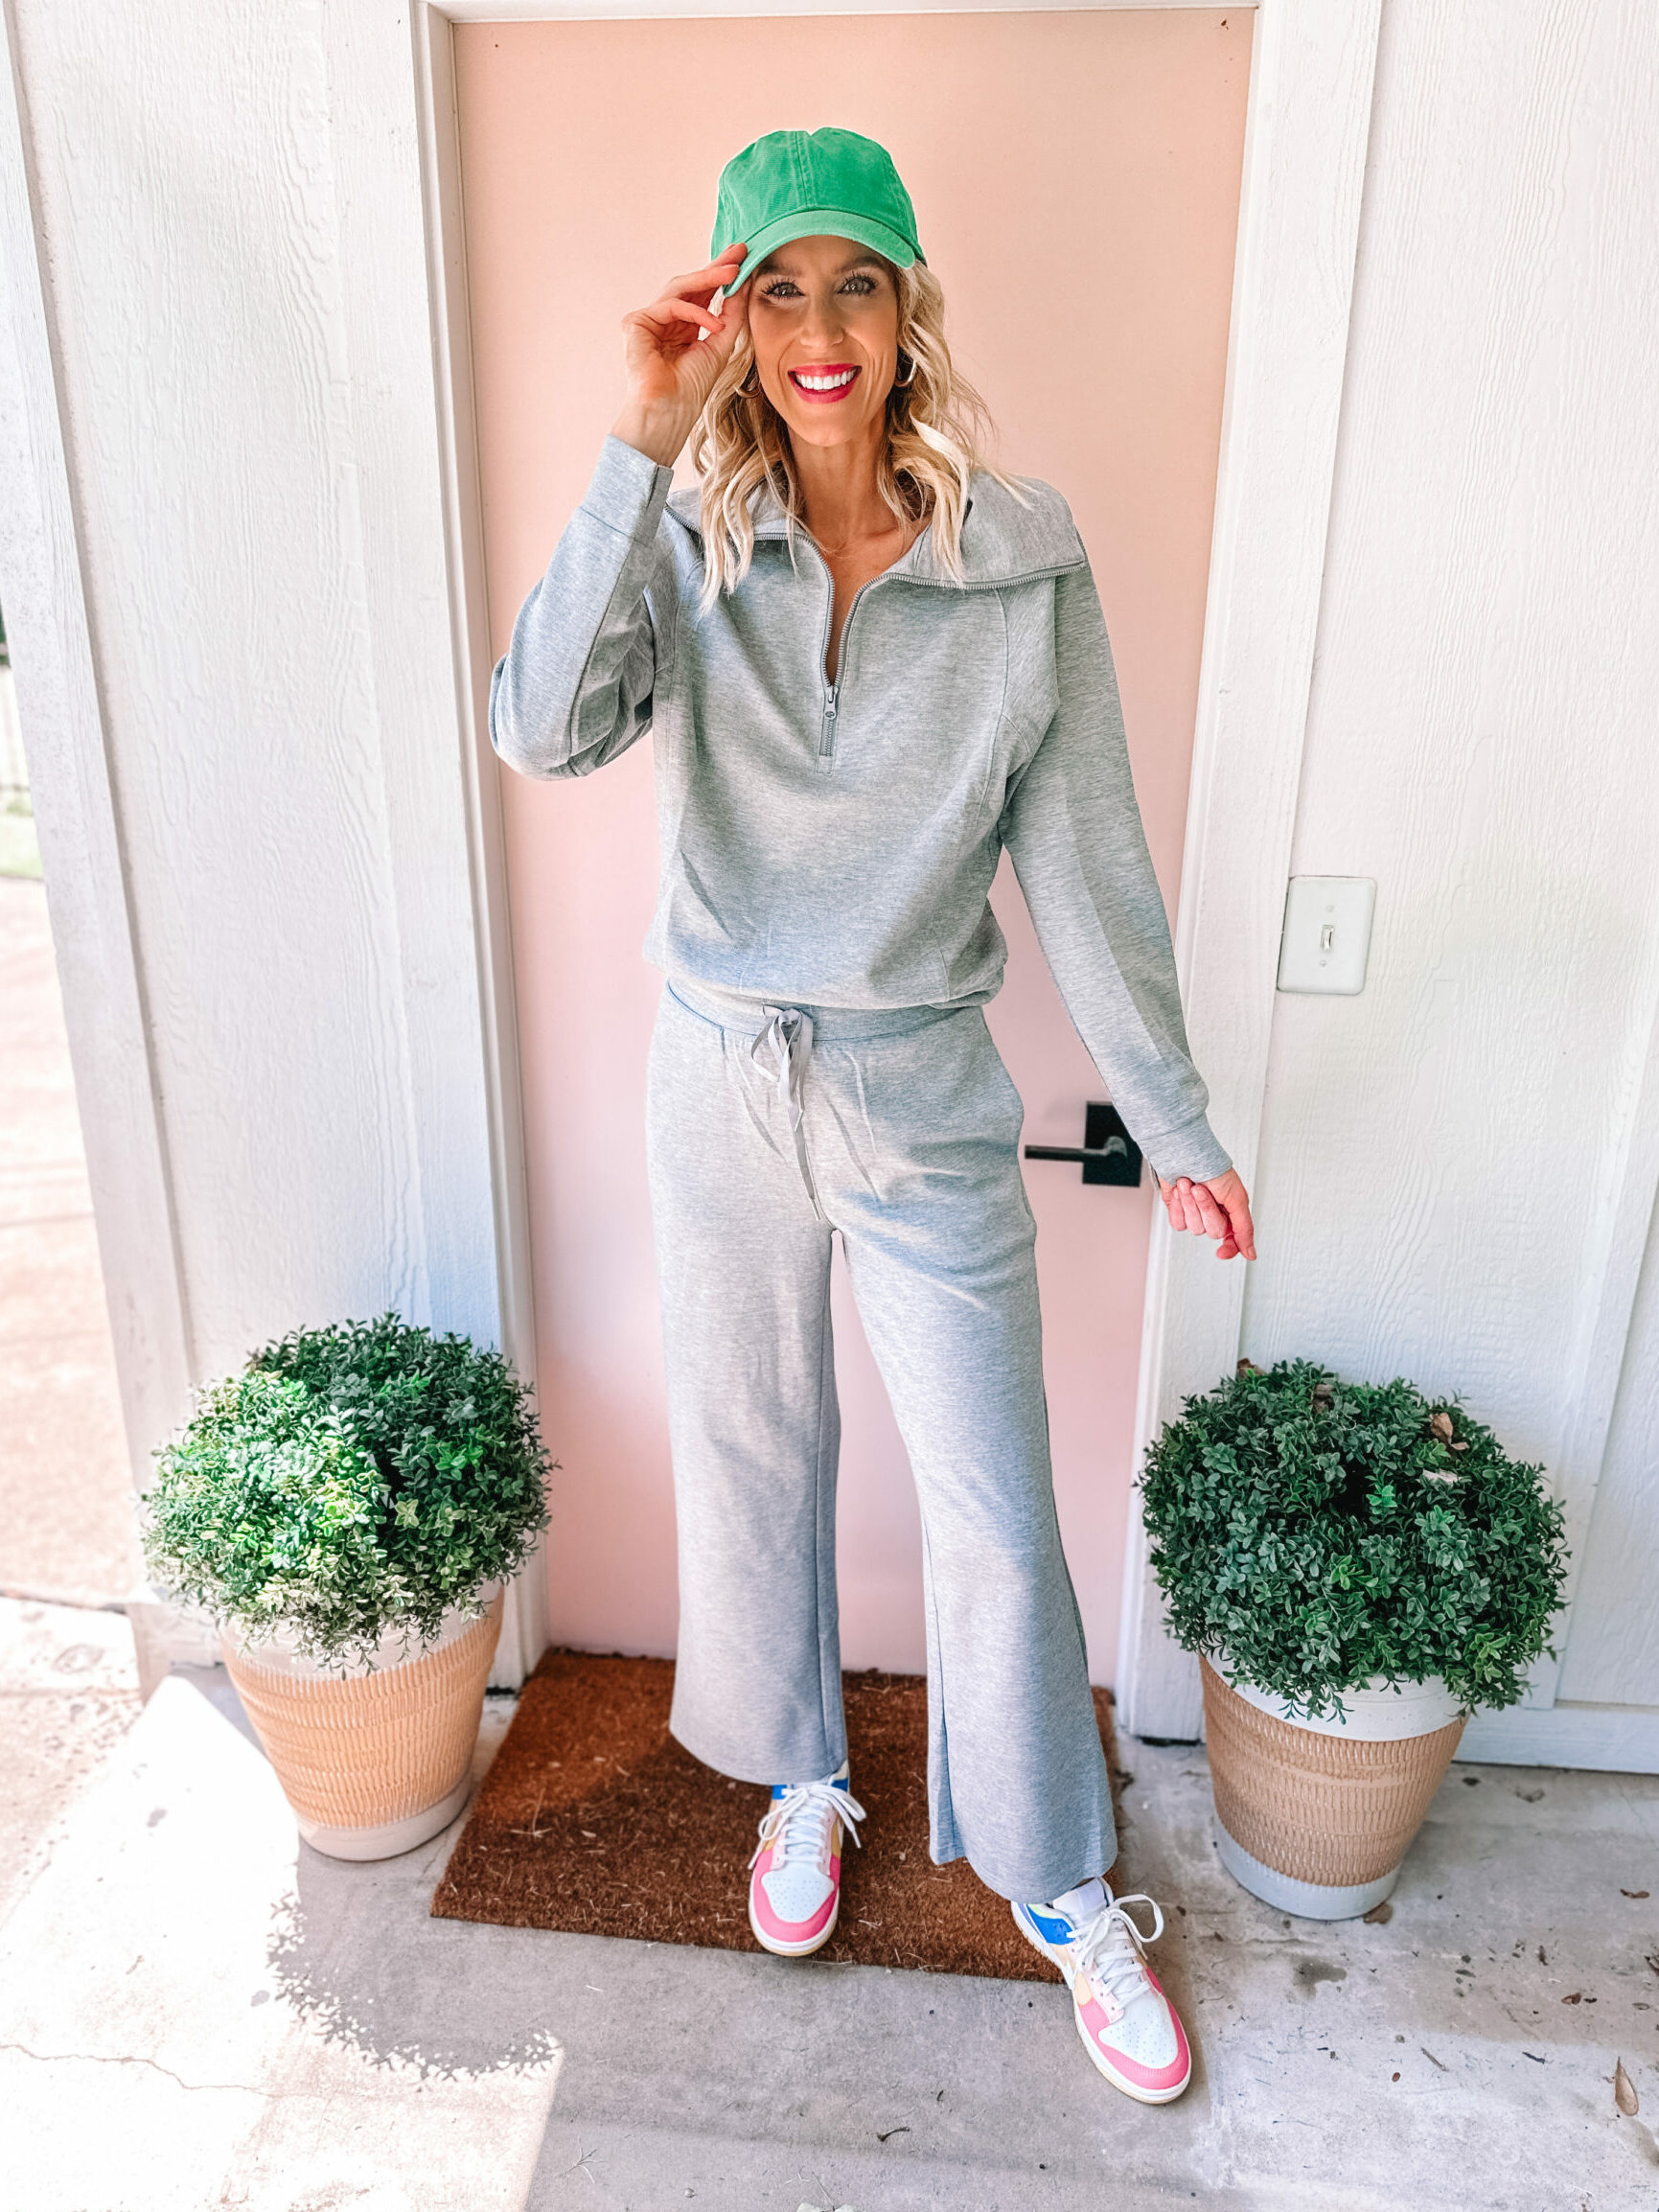 This New Spanx Sweatshirt Is a Travel Must-have